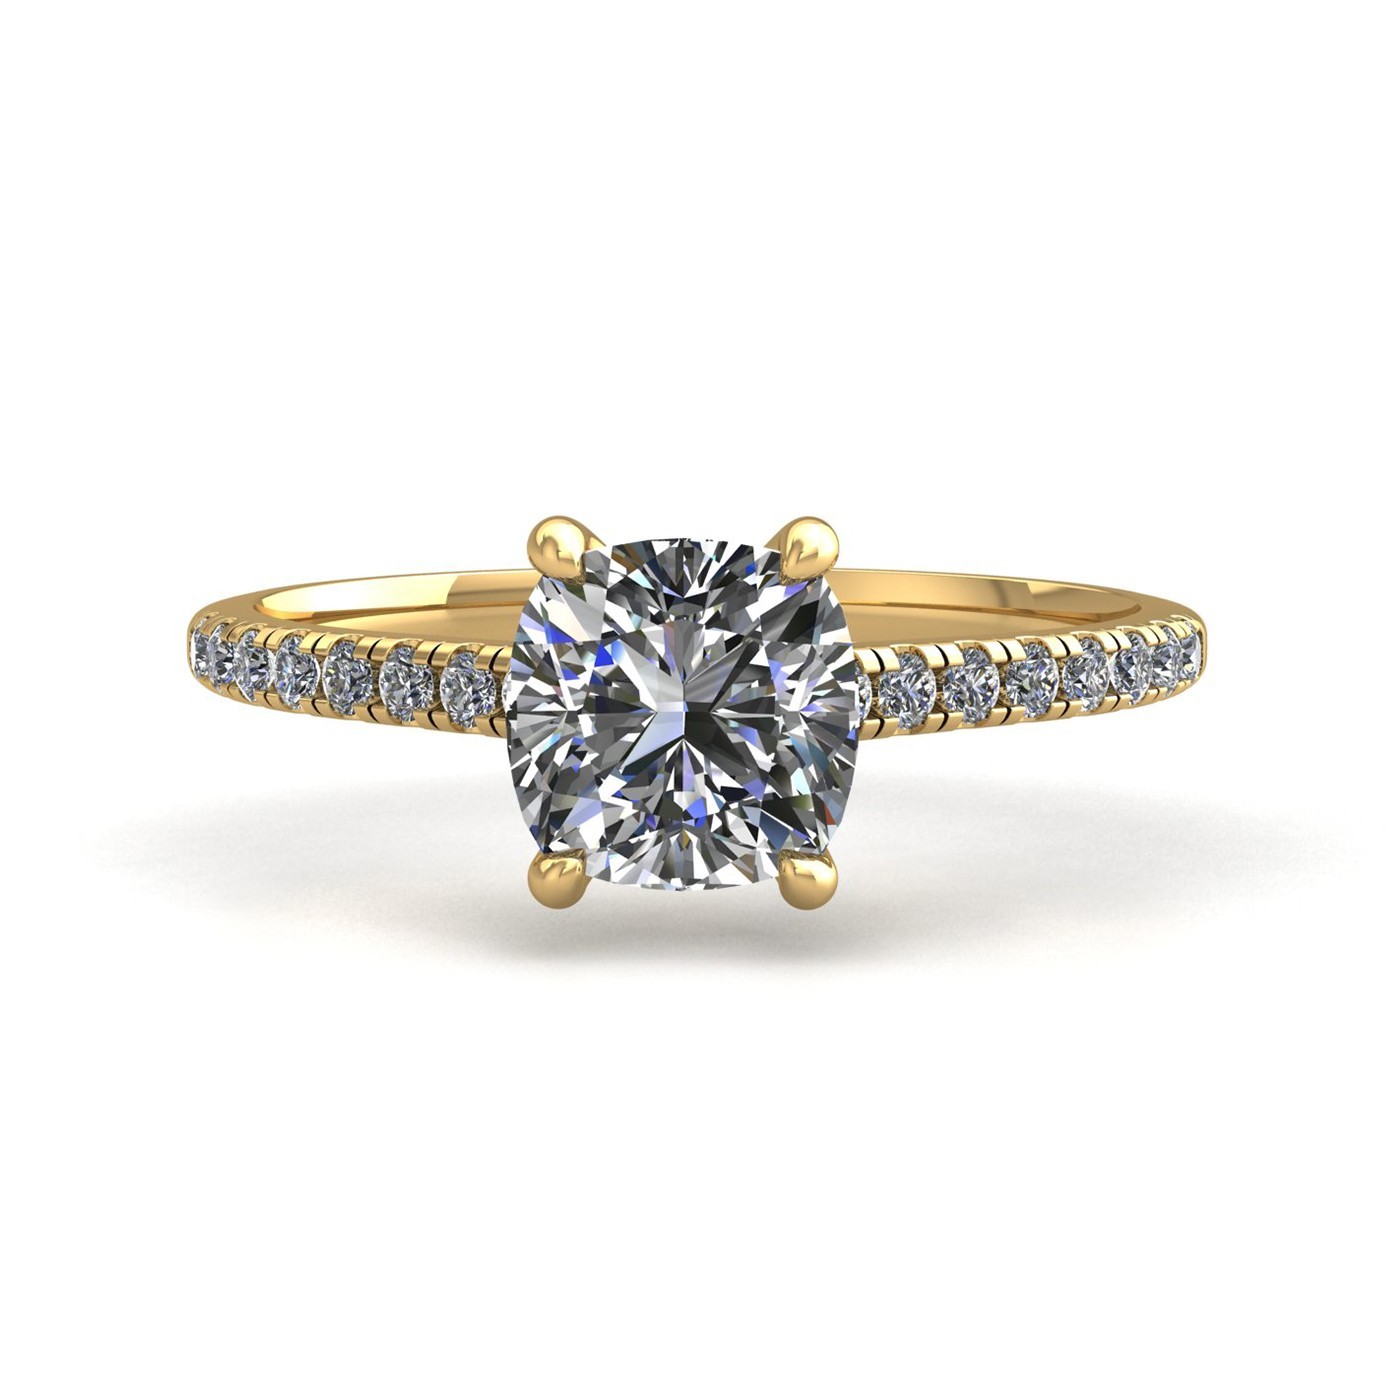 18k yellow gold 2.0ct 4 prongs cushion cut diamond engagement ring with whisper thin pavÉ set band Photos & images